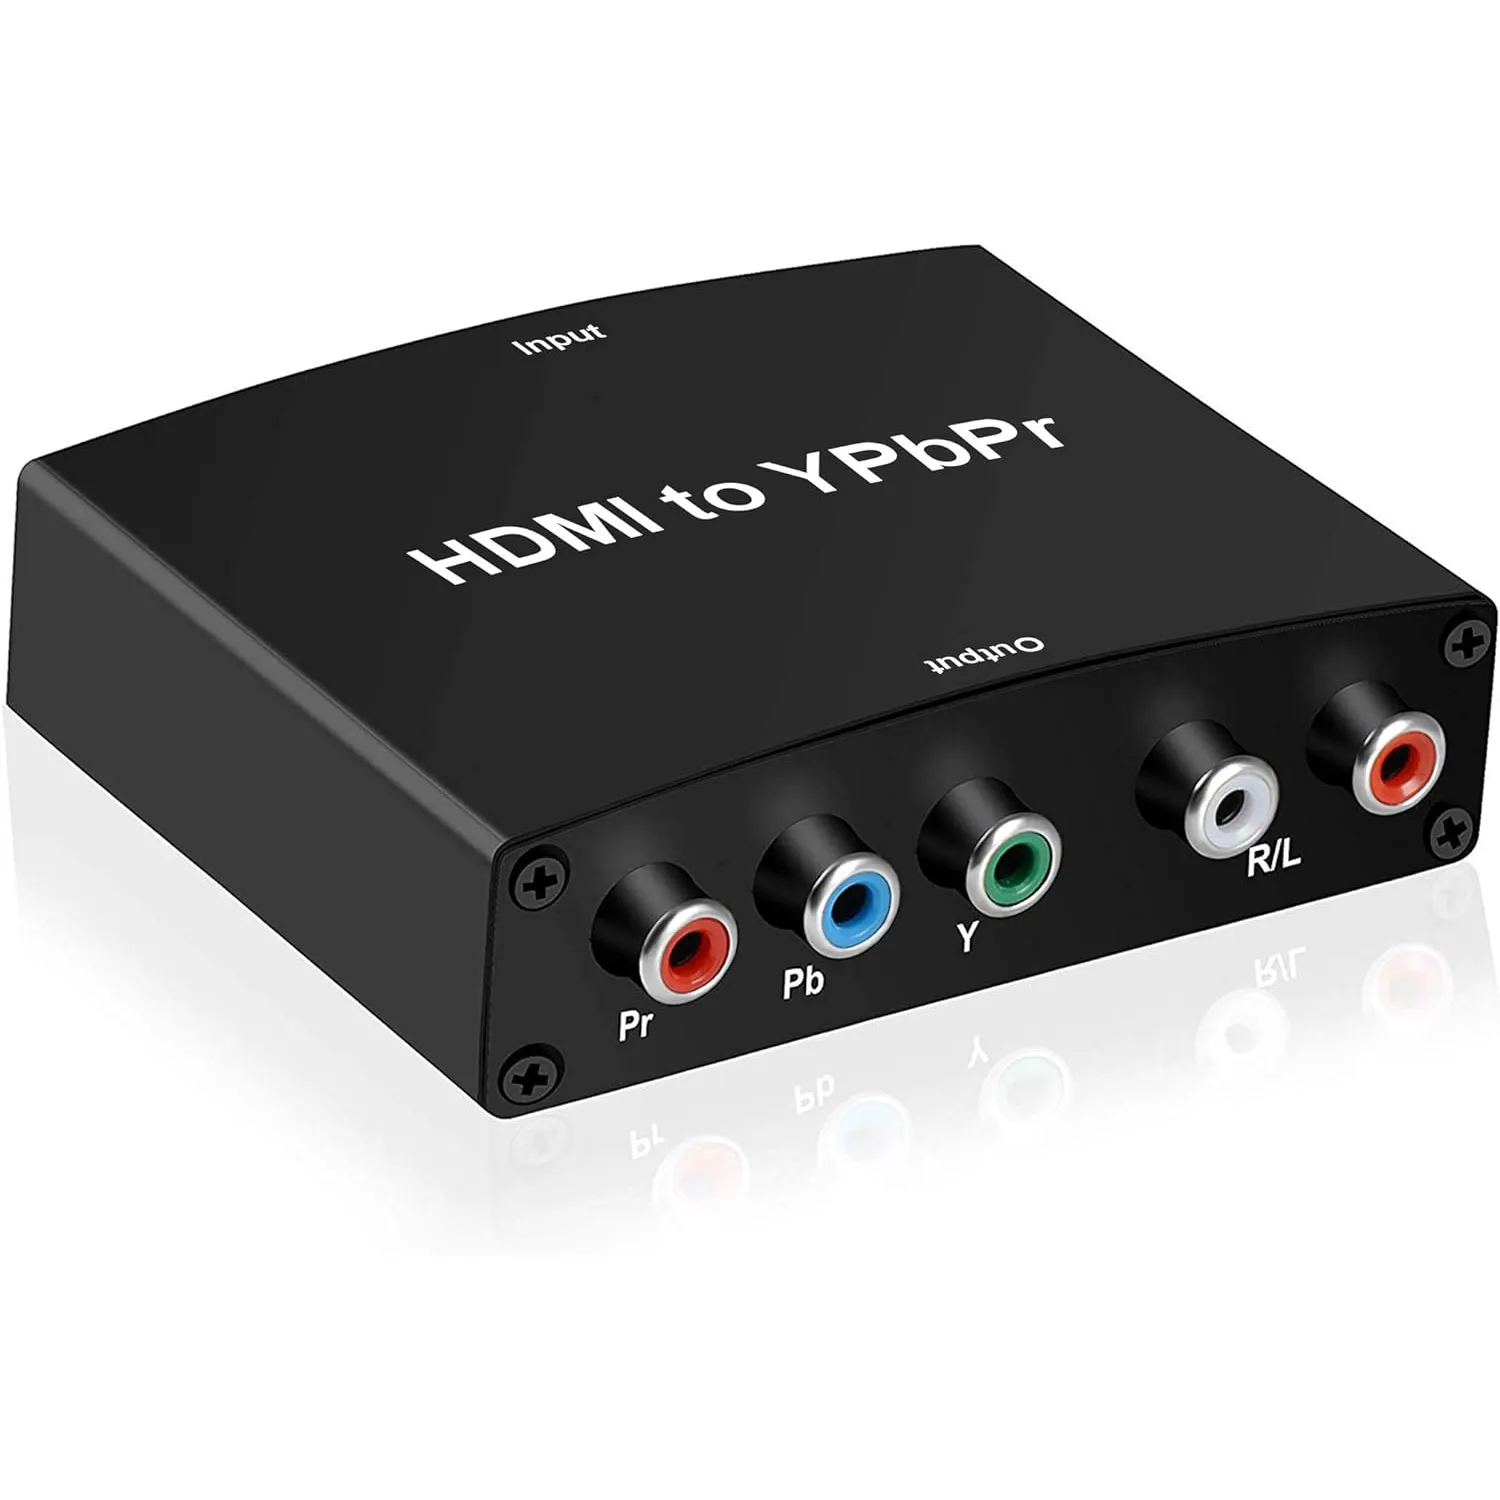 Justlink HDMI to Component Converter, HDMI to YPbPr 5RCA RGB + R/L Converter V1.4 with R/L Audio Output Support for MacBook TV